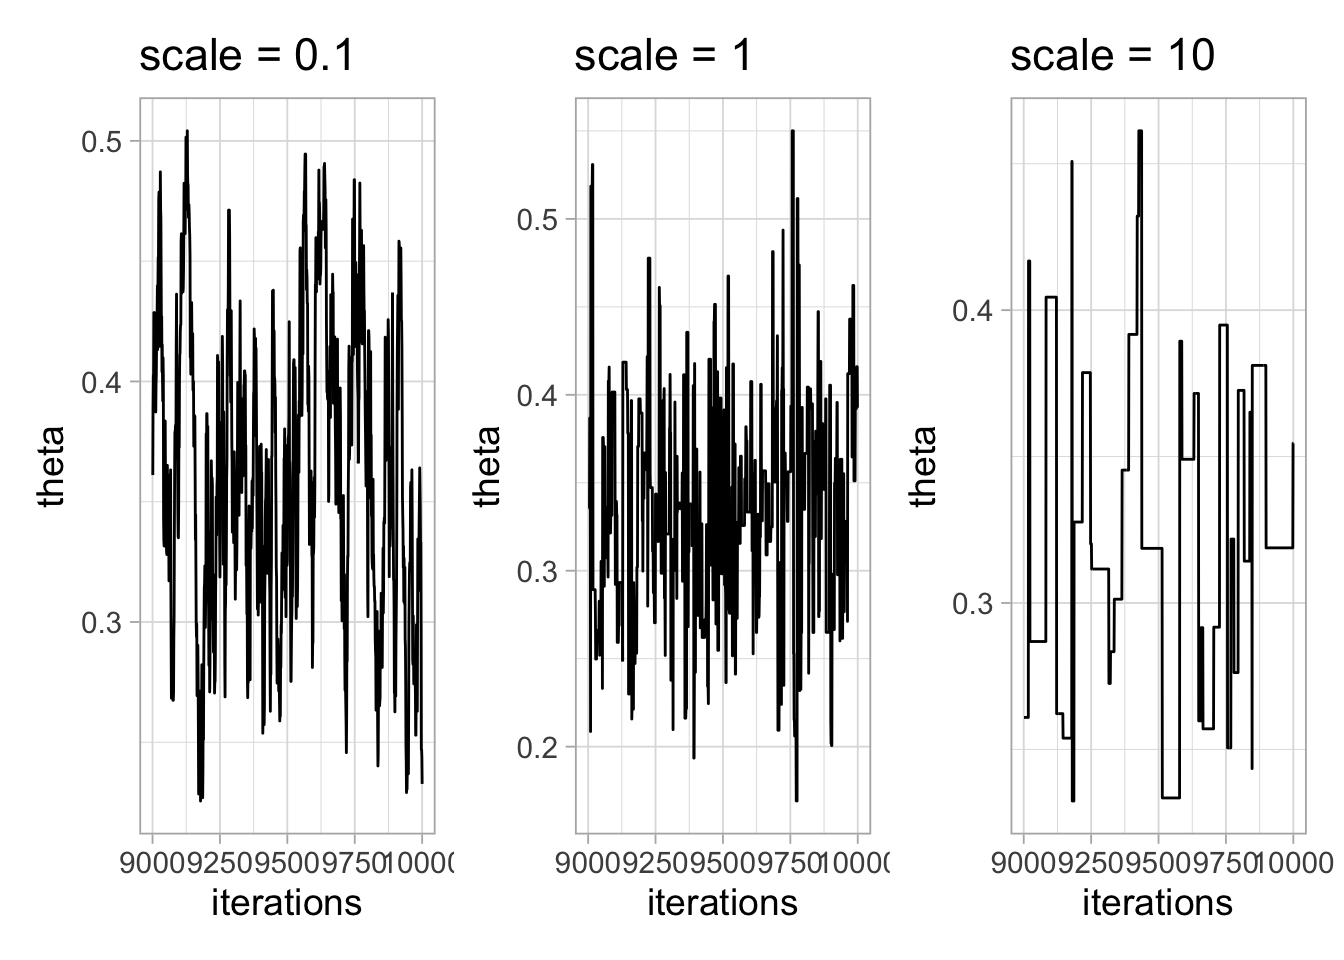 Trace plots for different values of the standard deviation (scale) of the proposal distribution.